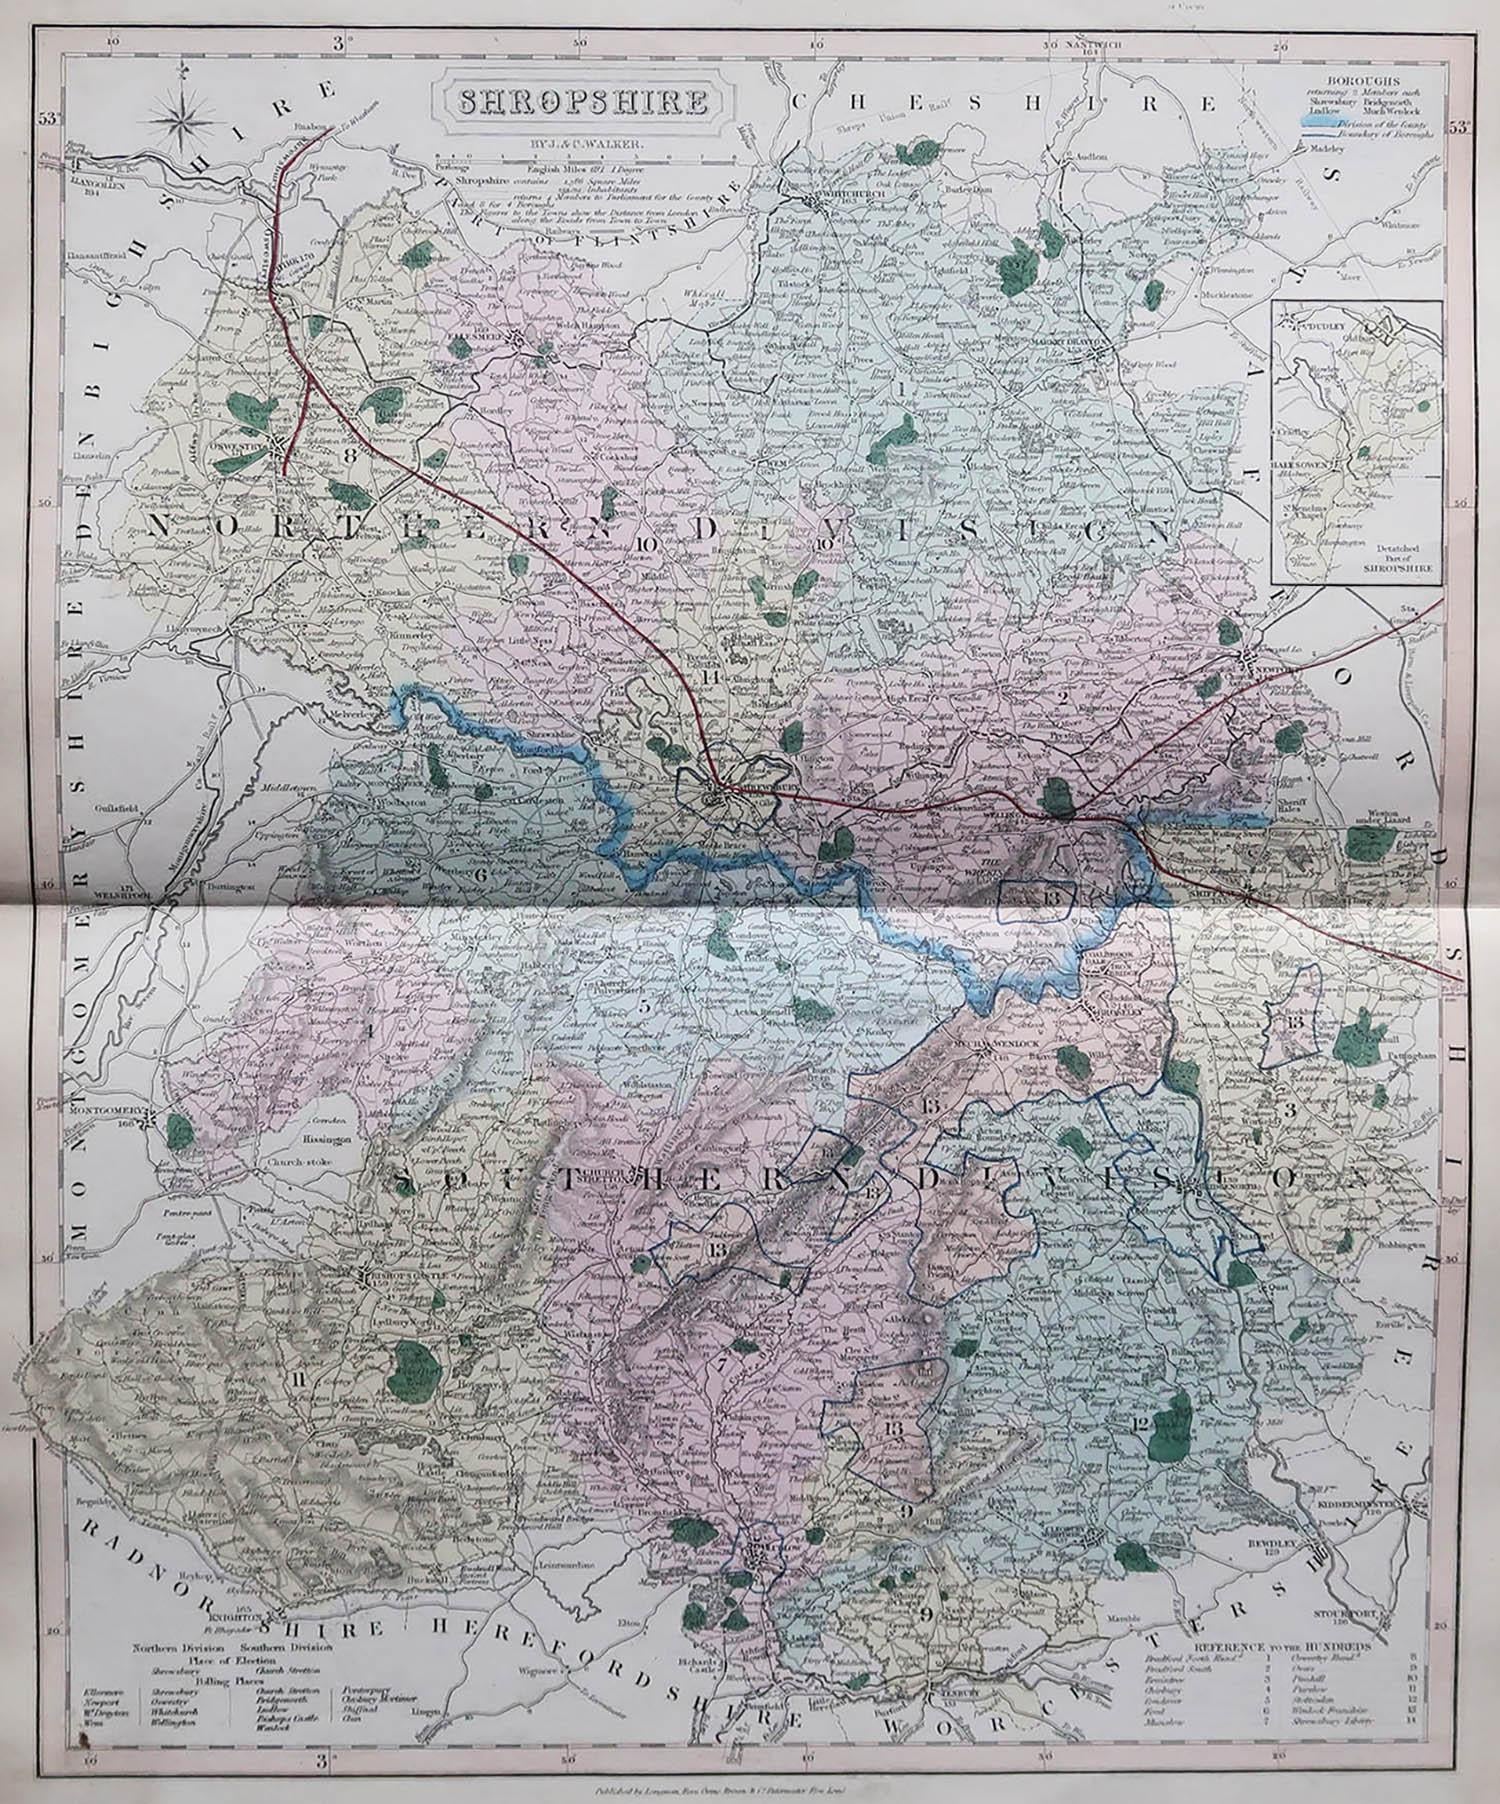 Great map of Shropshire

Original colour

By J & C Walker

Published by Longman, Rees, Orme, Brown & Co. 1851

Unframed.




